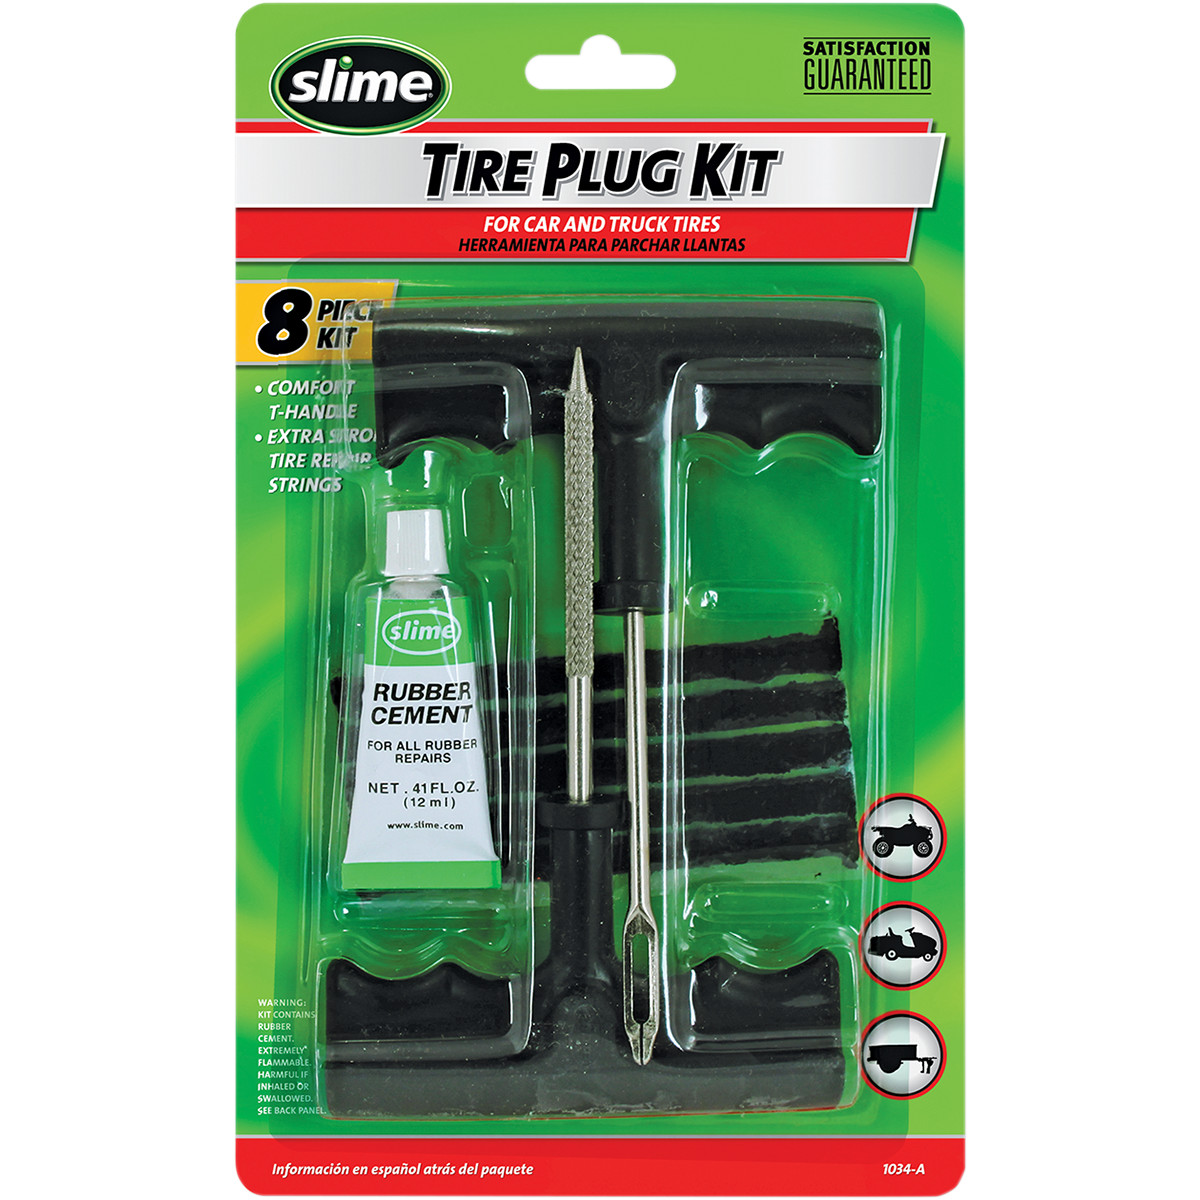 Slime Tire Plug Kit for Motorcycles